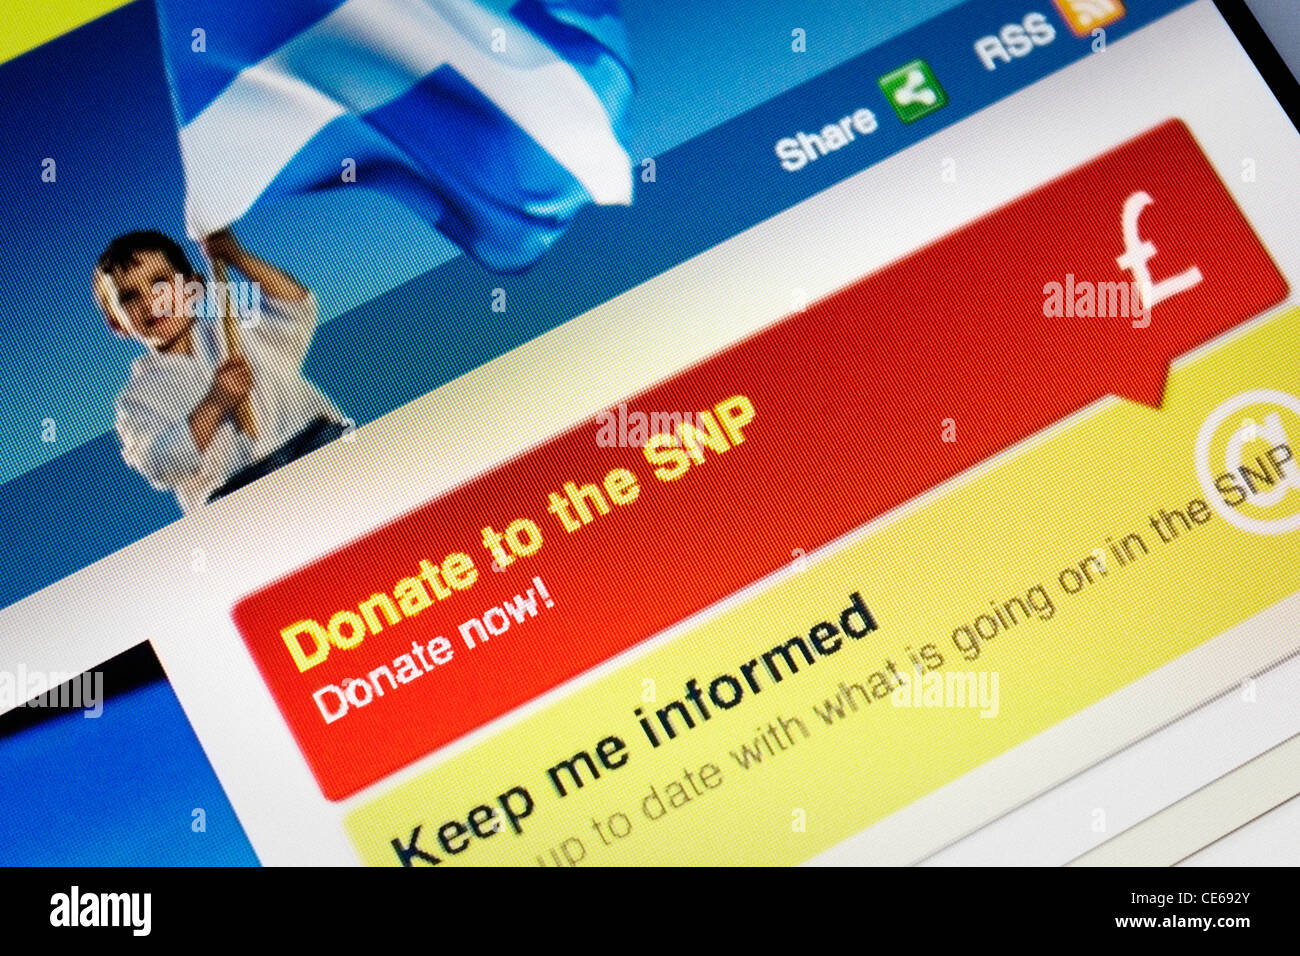 Snp party web site home page Stock Photo